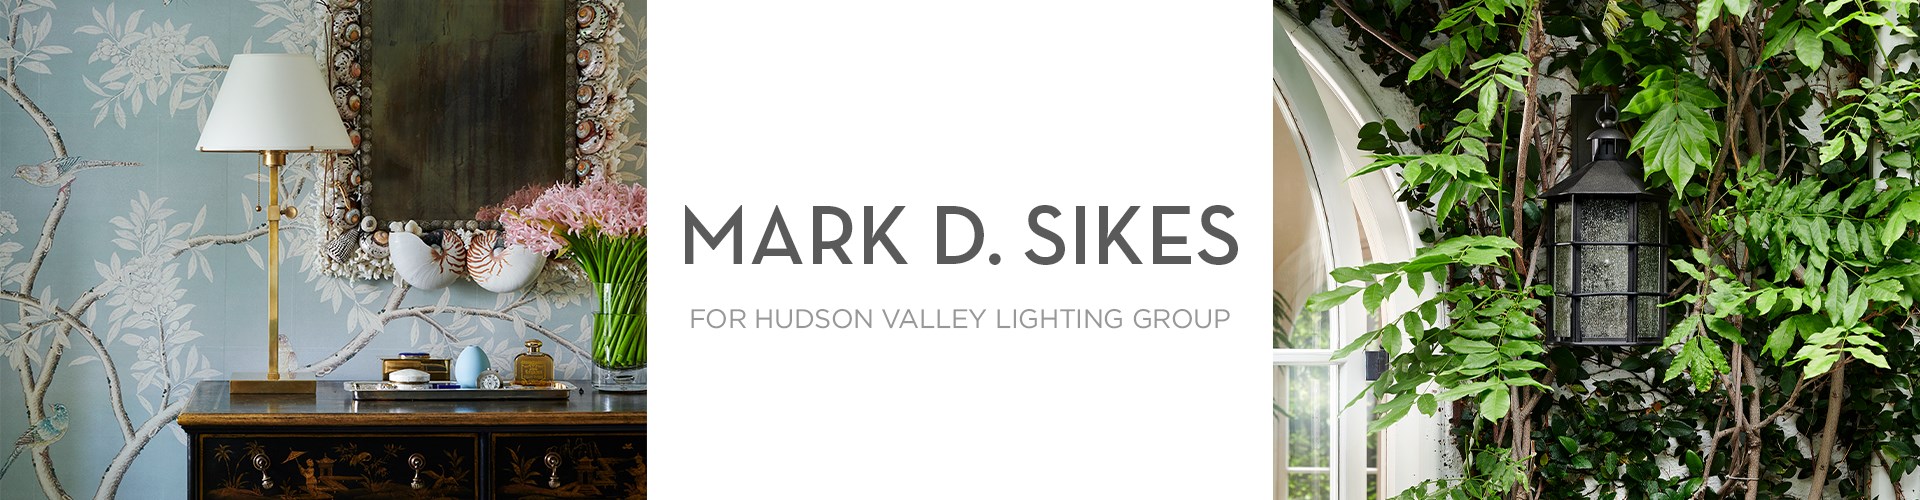 MARK D. SIKES